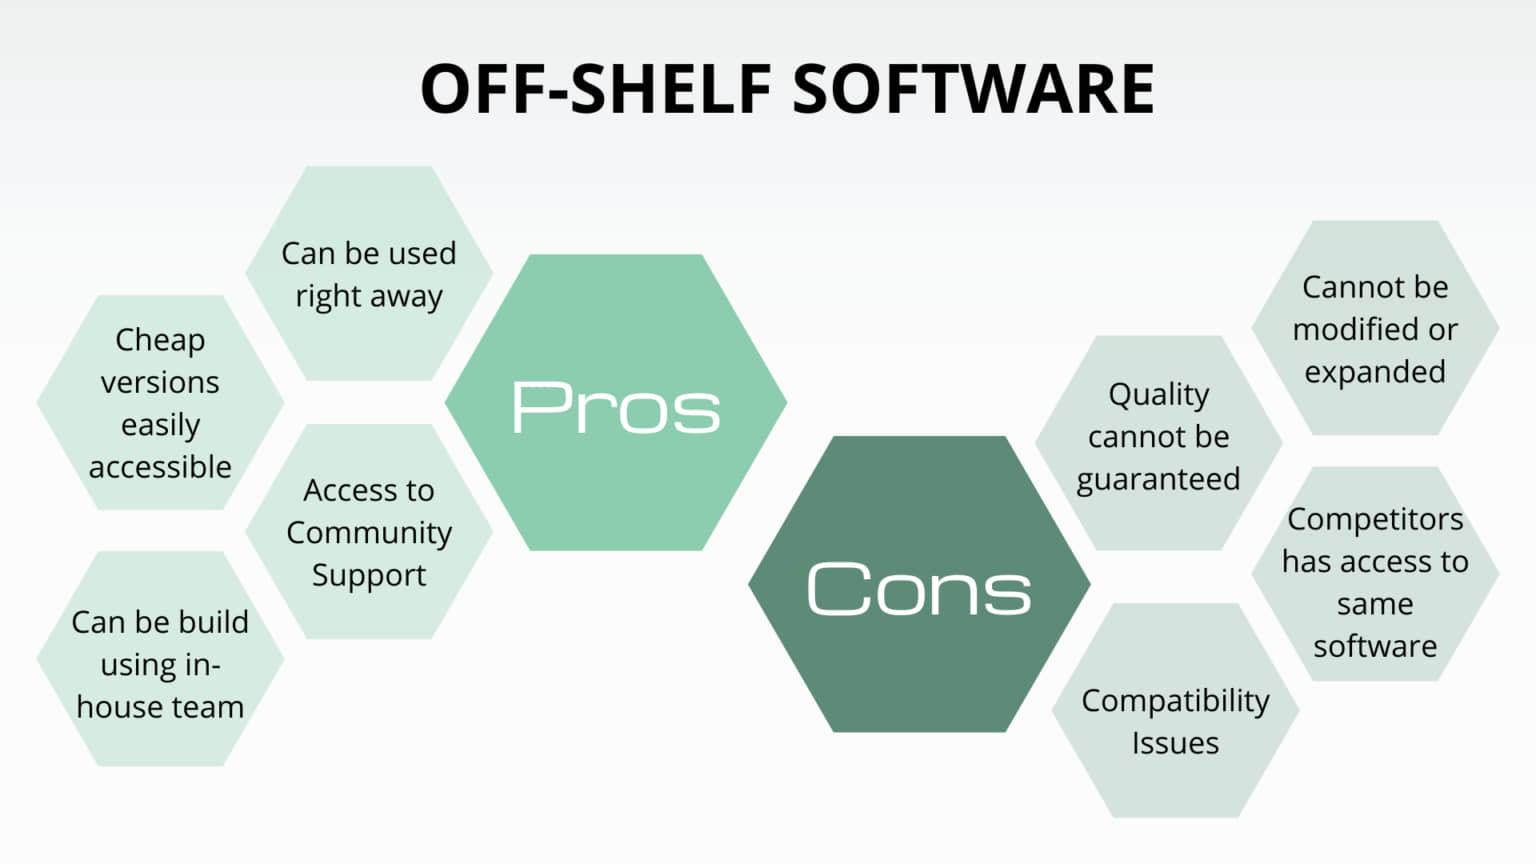 Pros and Cons of Off-Shelf software